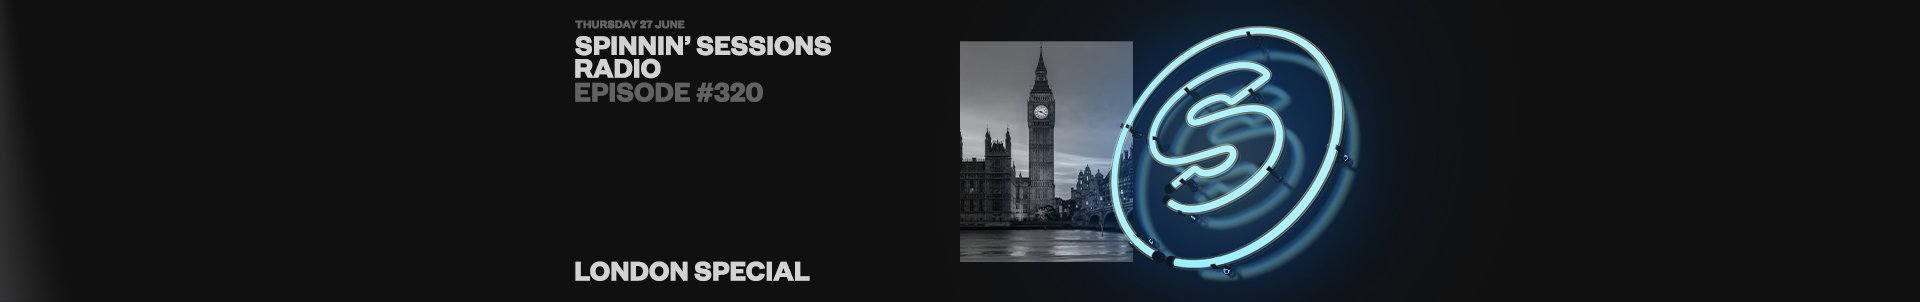 Spinnin' Sessions radio show #320 presents London Special